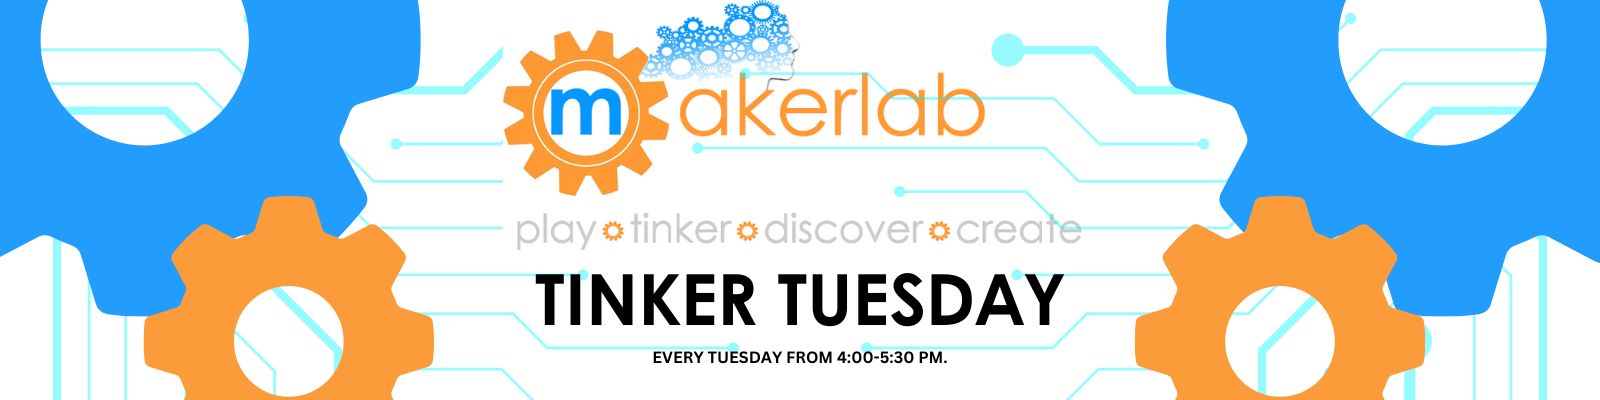 Tinker Tuesday event graphic